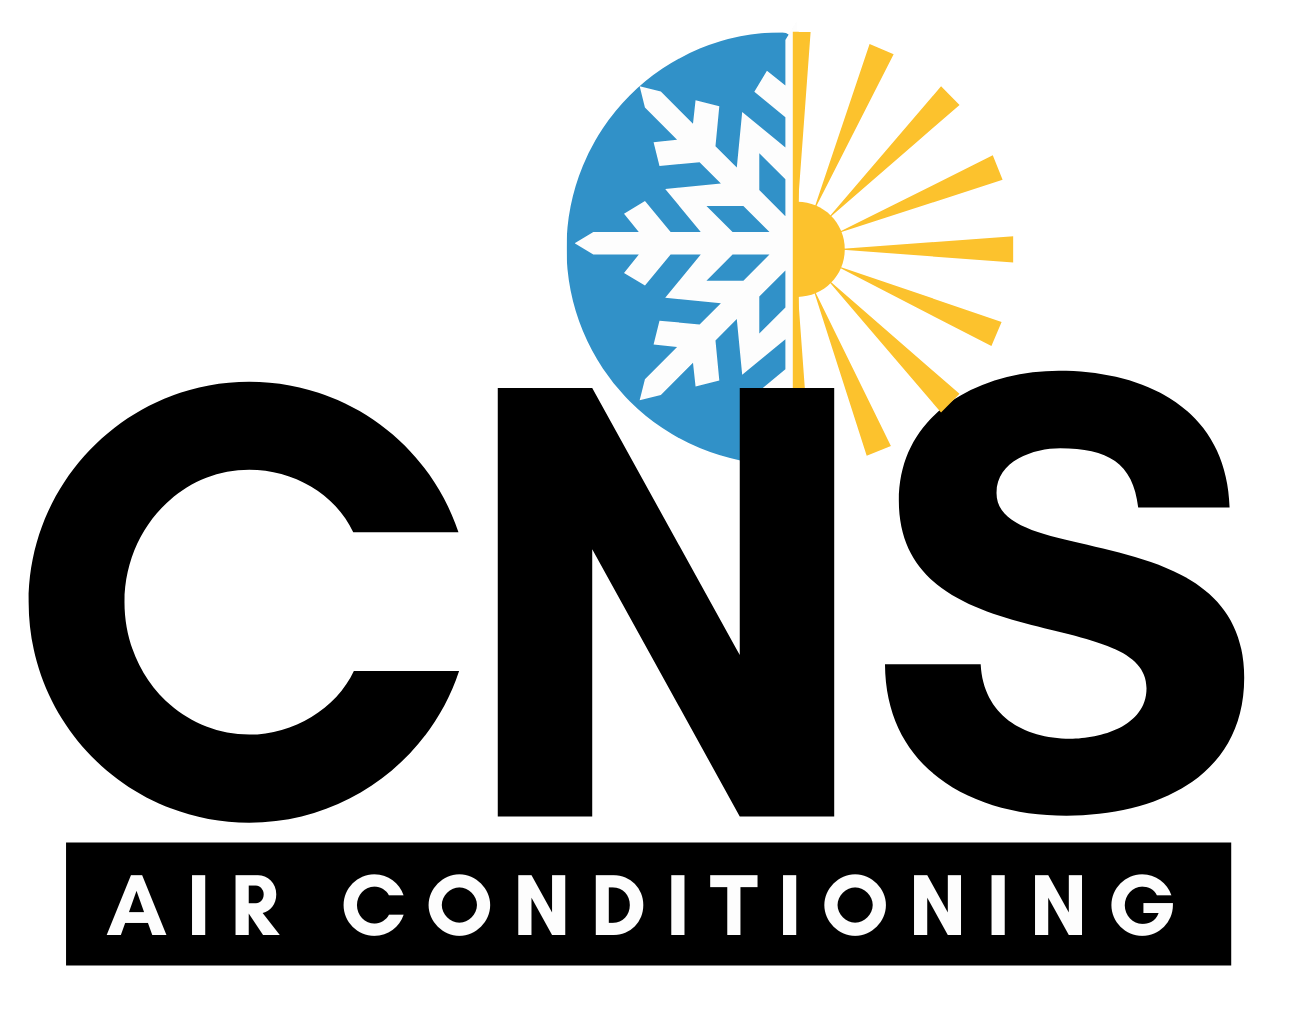 CNS Air Conditioning